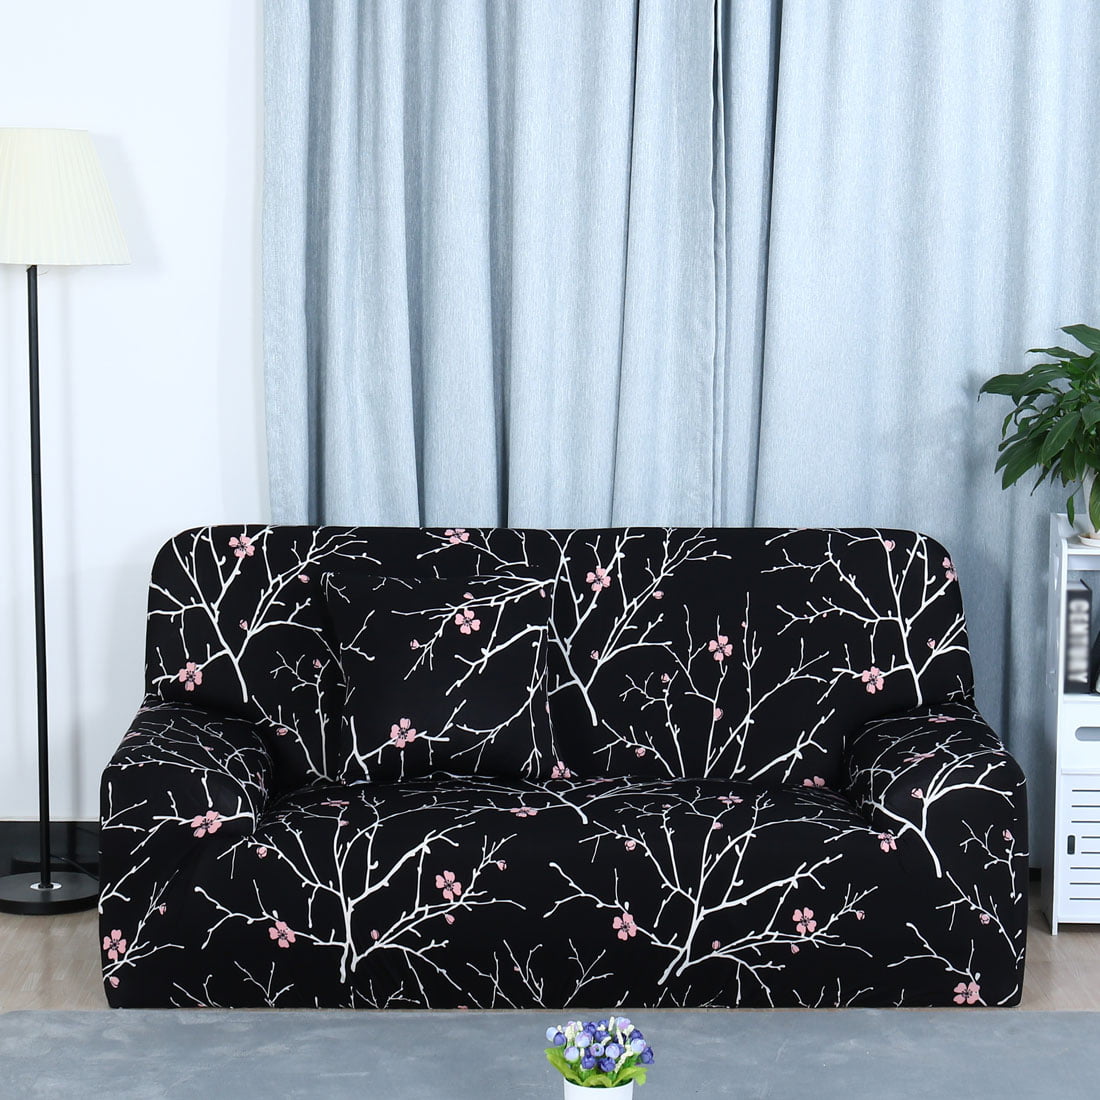 1-4 Seater Eyelash Lips Print Slipcover Sofa Cover Couch Cover Elastic Protector 